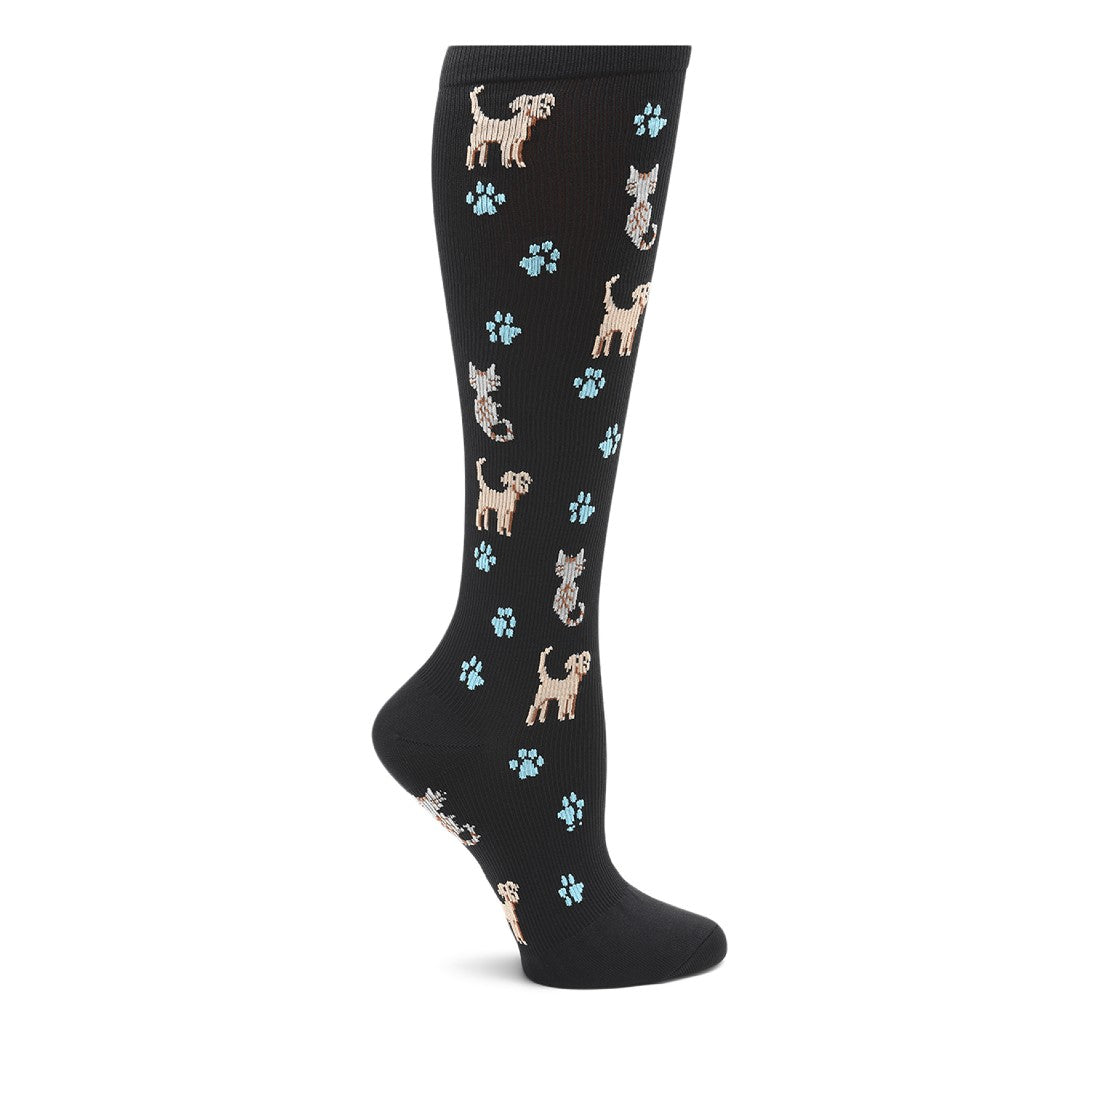 Pets & Paws Compression Socks with 12-14 mmHg